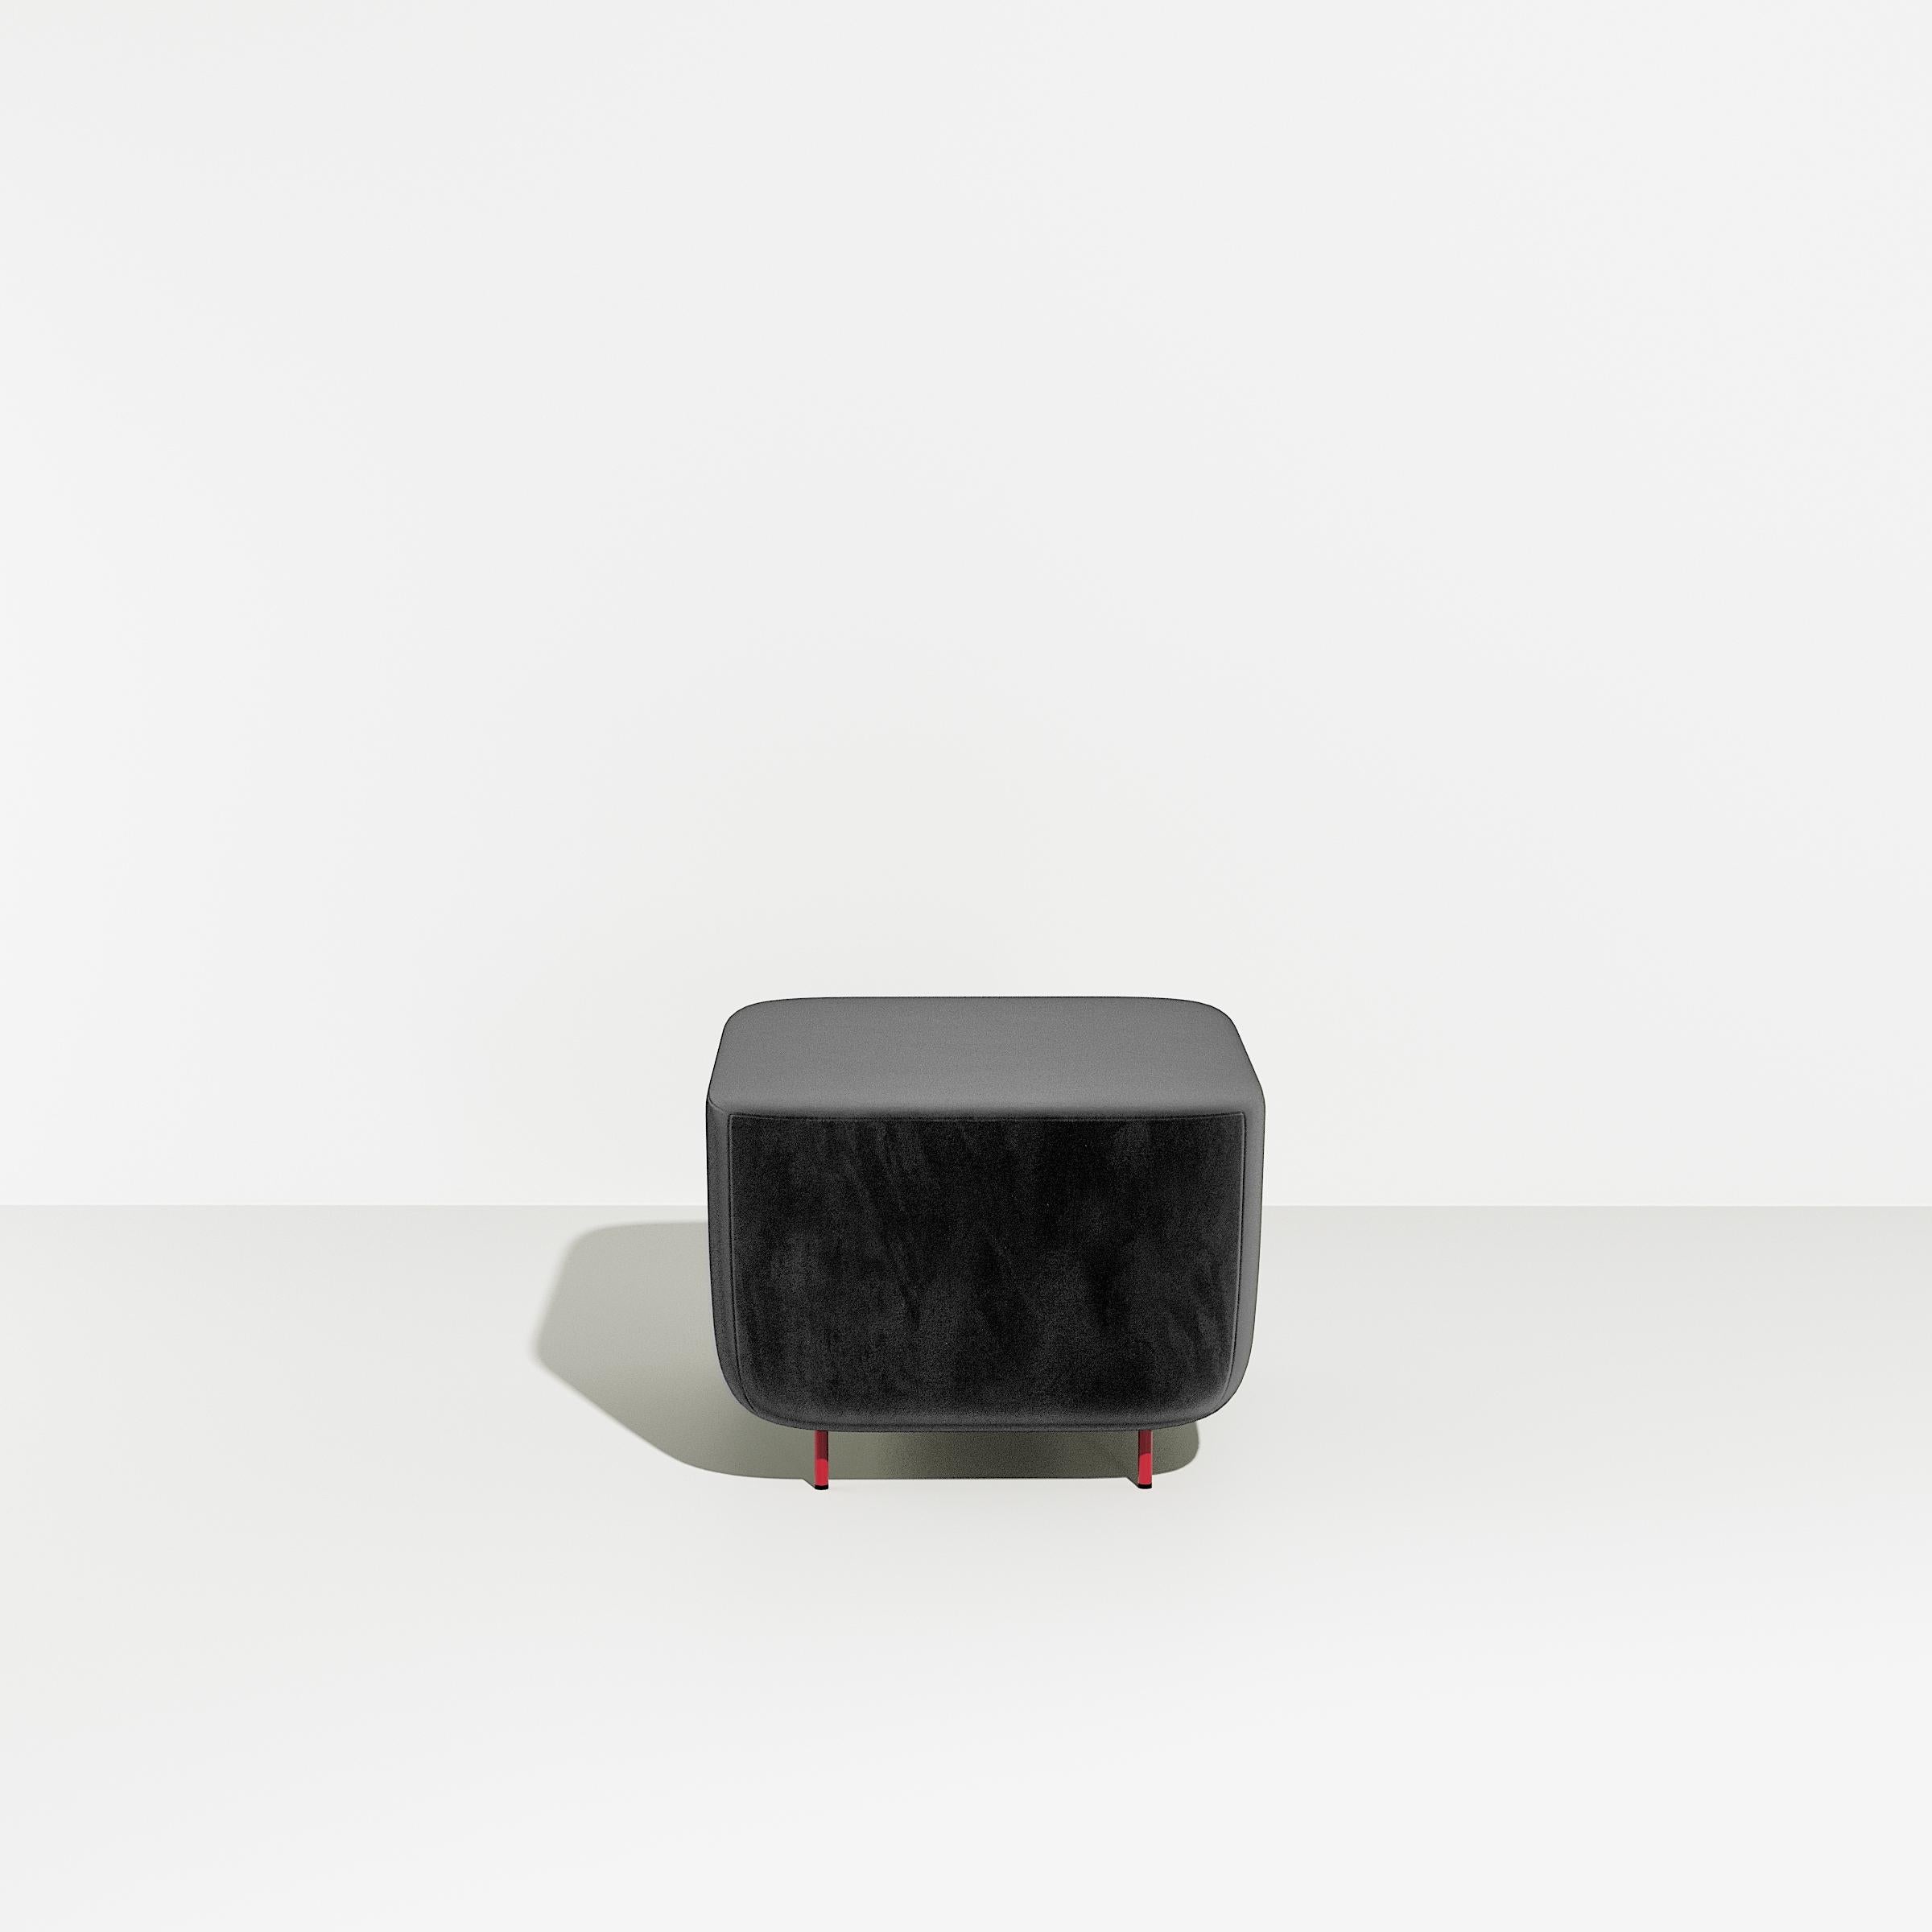 Petite Friture Small Hoff Stool in Grey-black by Morten & Jonas, 2015

Hoff created by designer duo Morten & Jonas is a collection of two modular stools and two modular armchairs. they can combine to make a sofa as well an entire living room area.